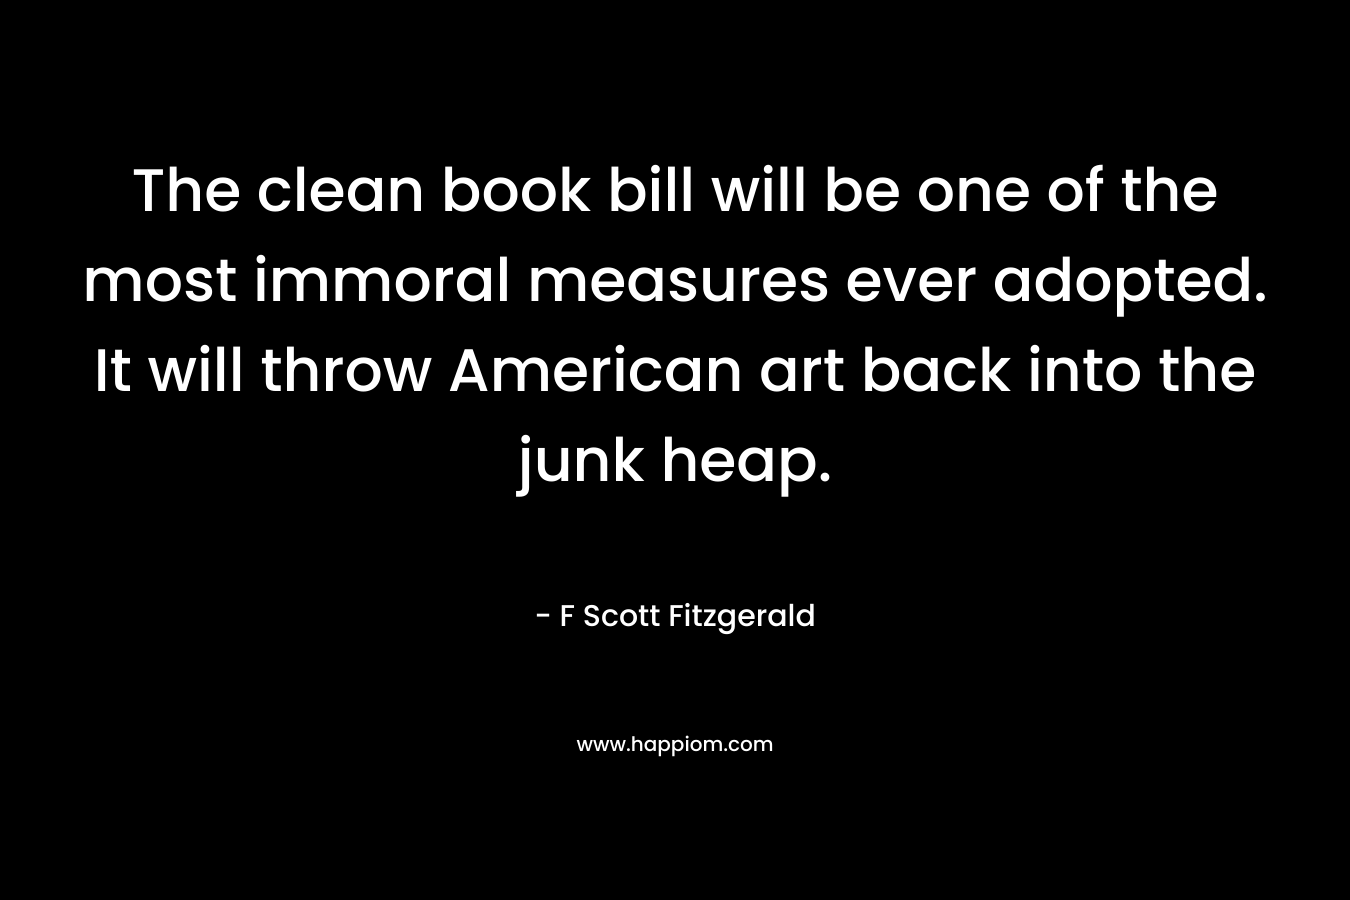 The clean book bill will be one of the most immoral measures ever adopted. It will throw American art back into the junk heap. – F Scott Fitzgerald